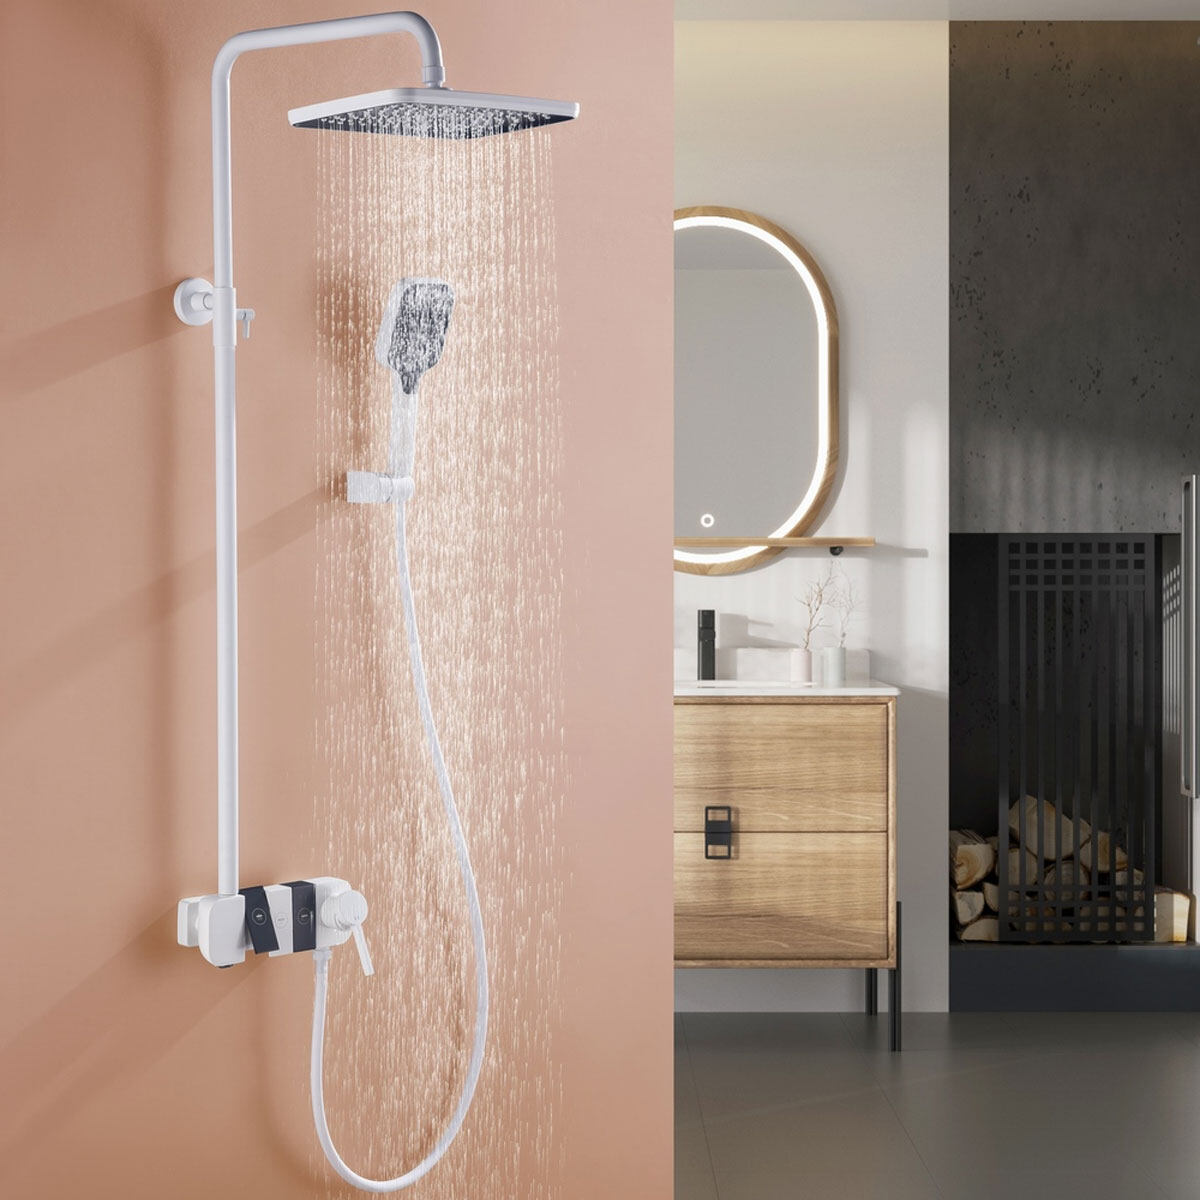 thermostatic complete shower system